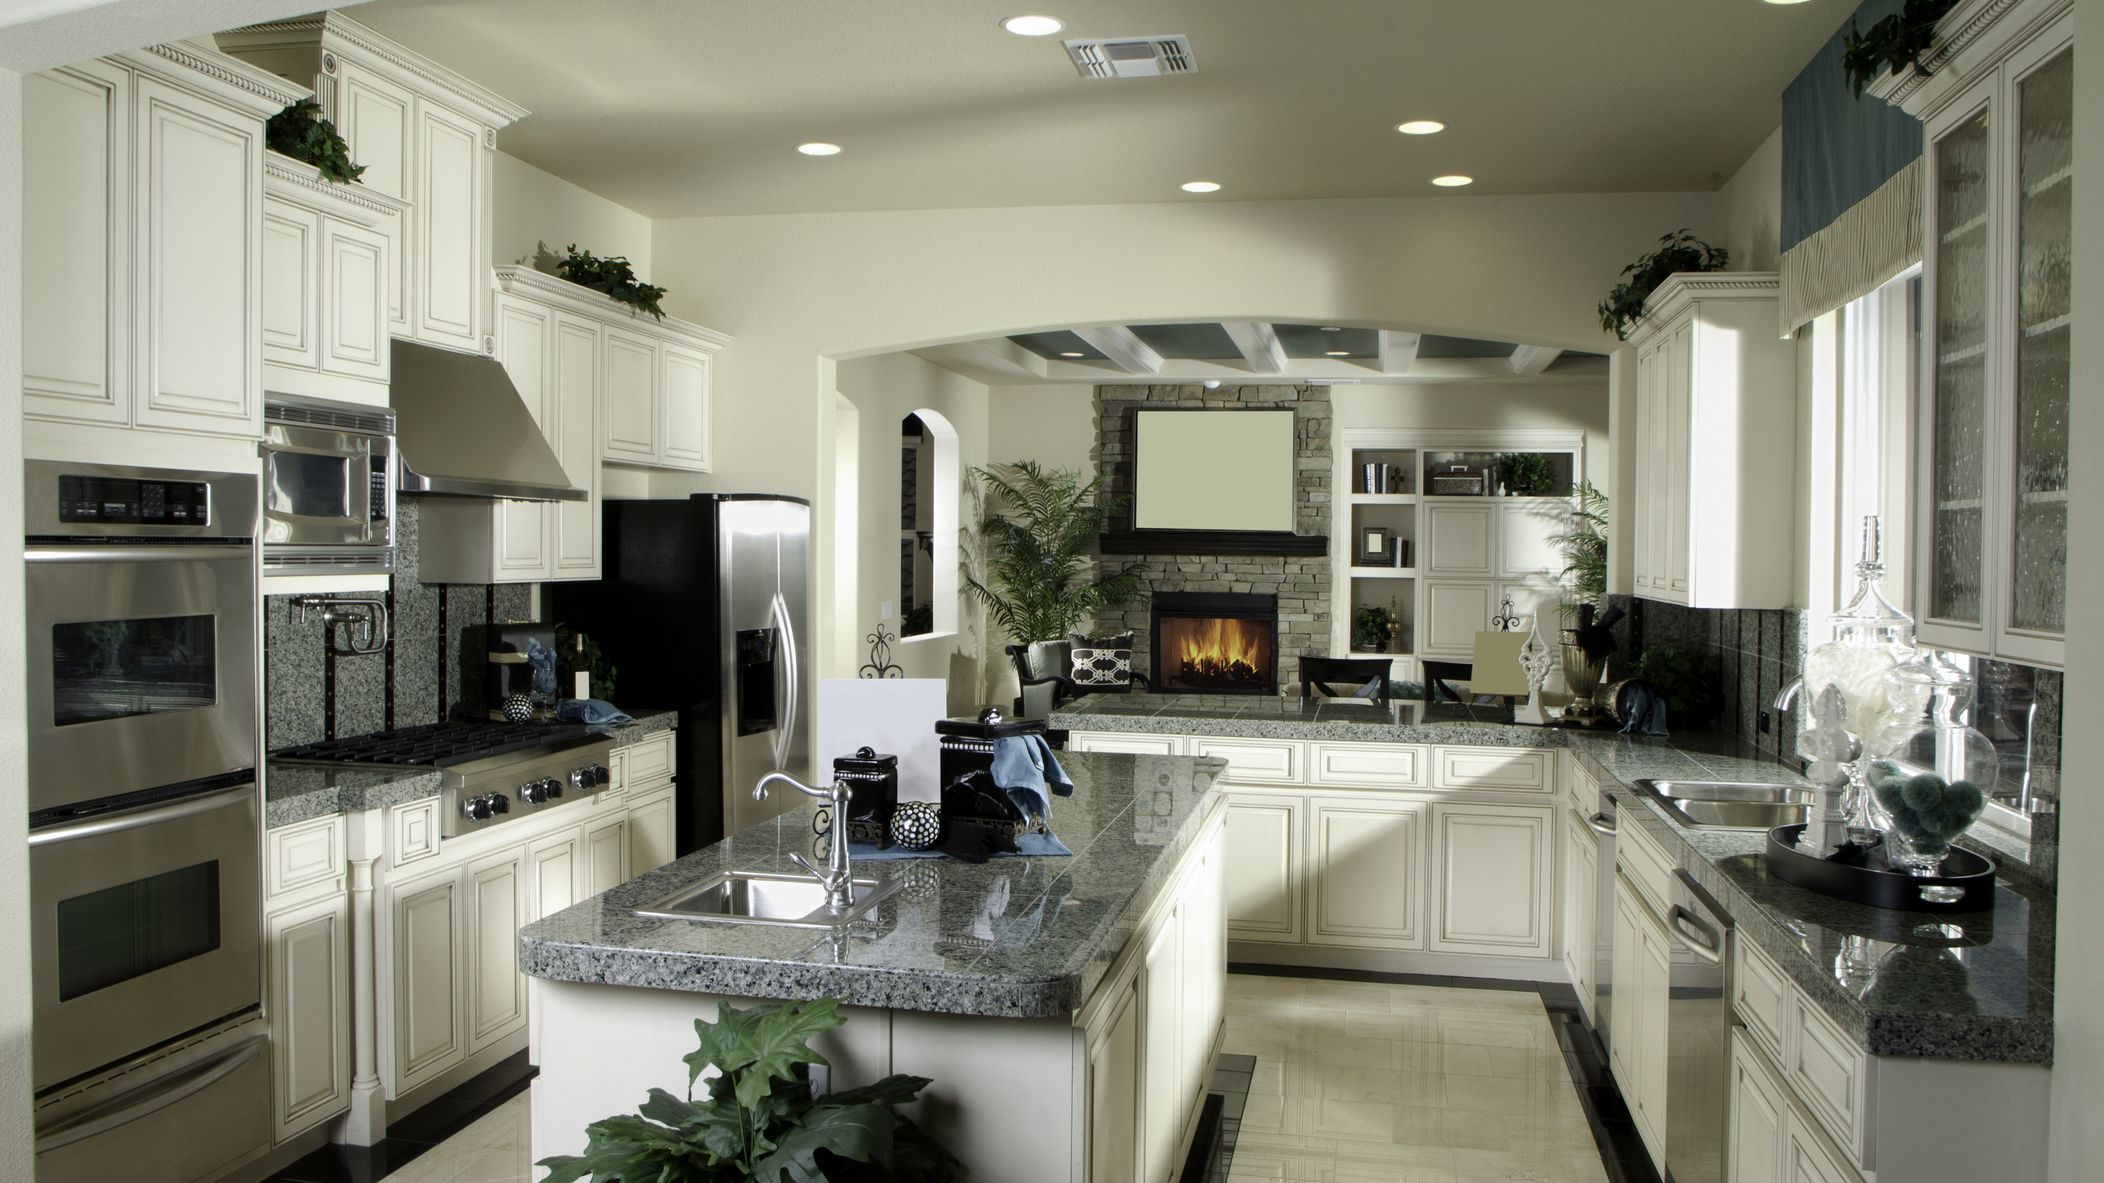 5 Wise Tips for Choosing New Appliance for Your Kitchen